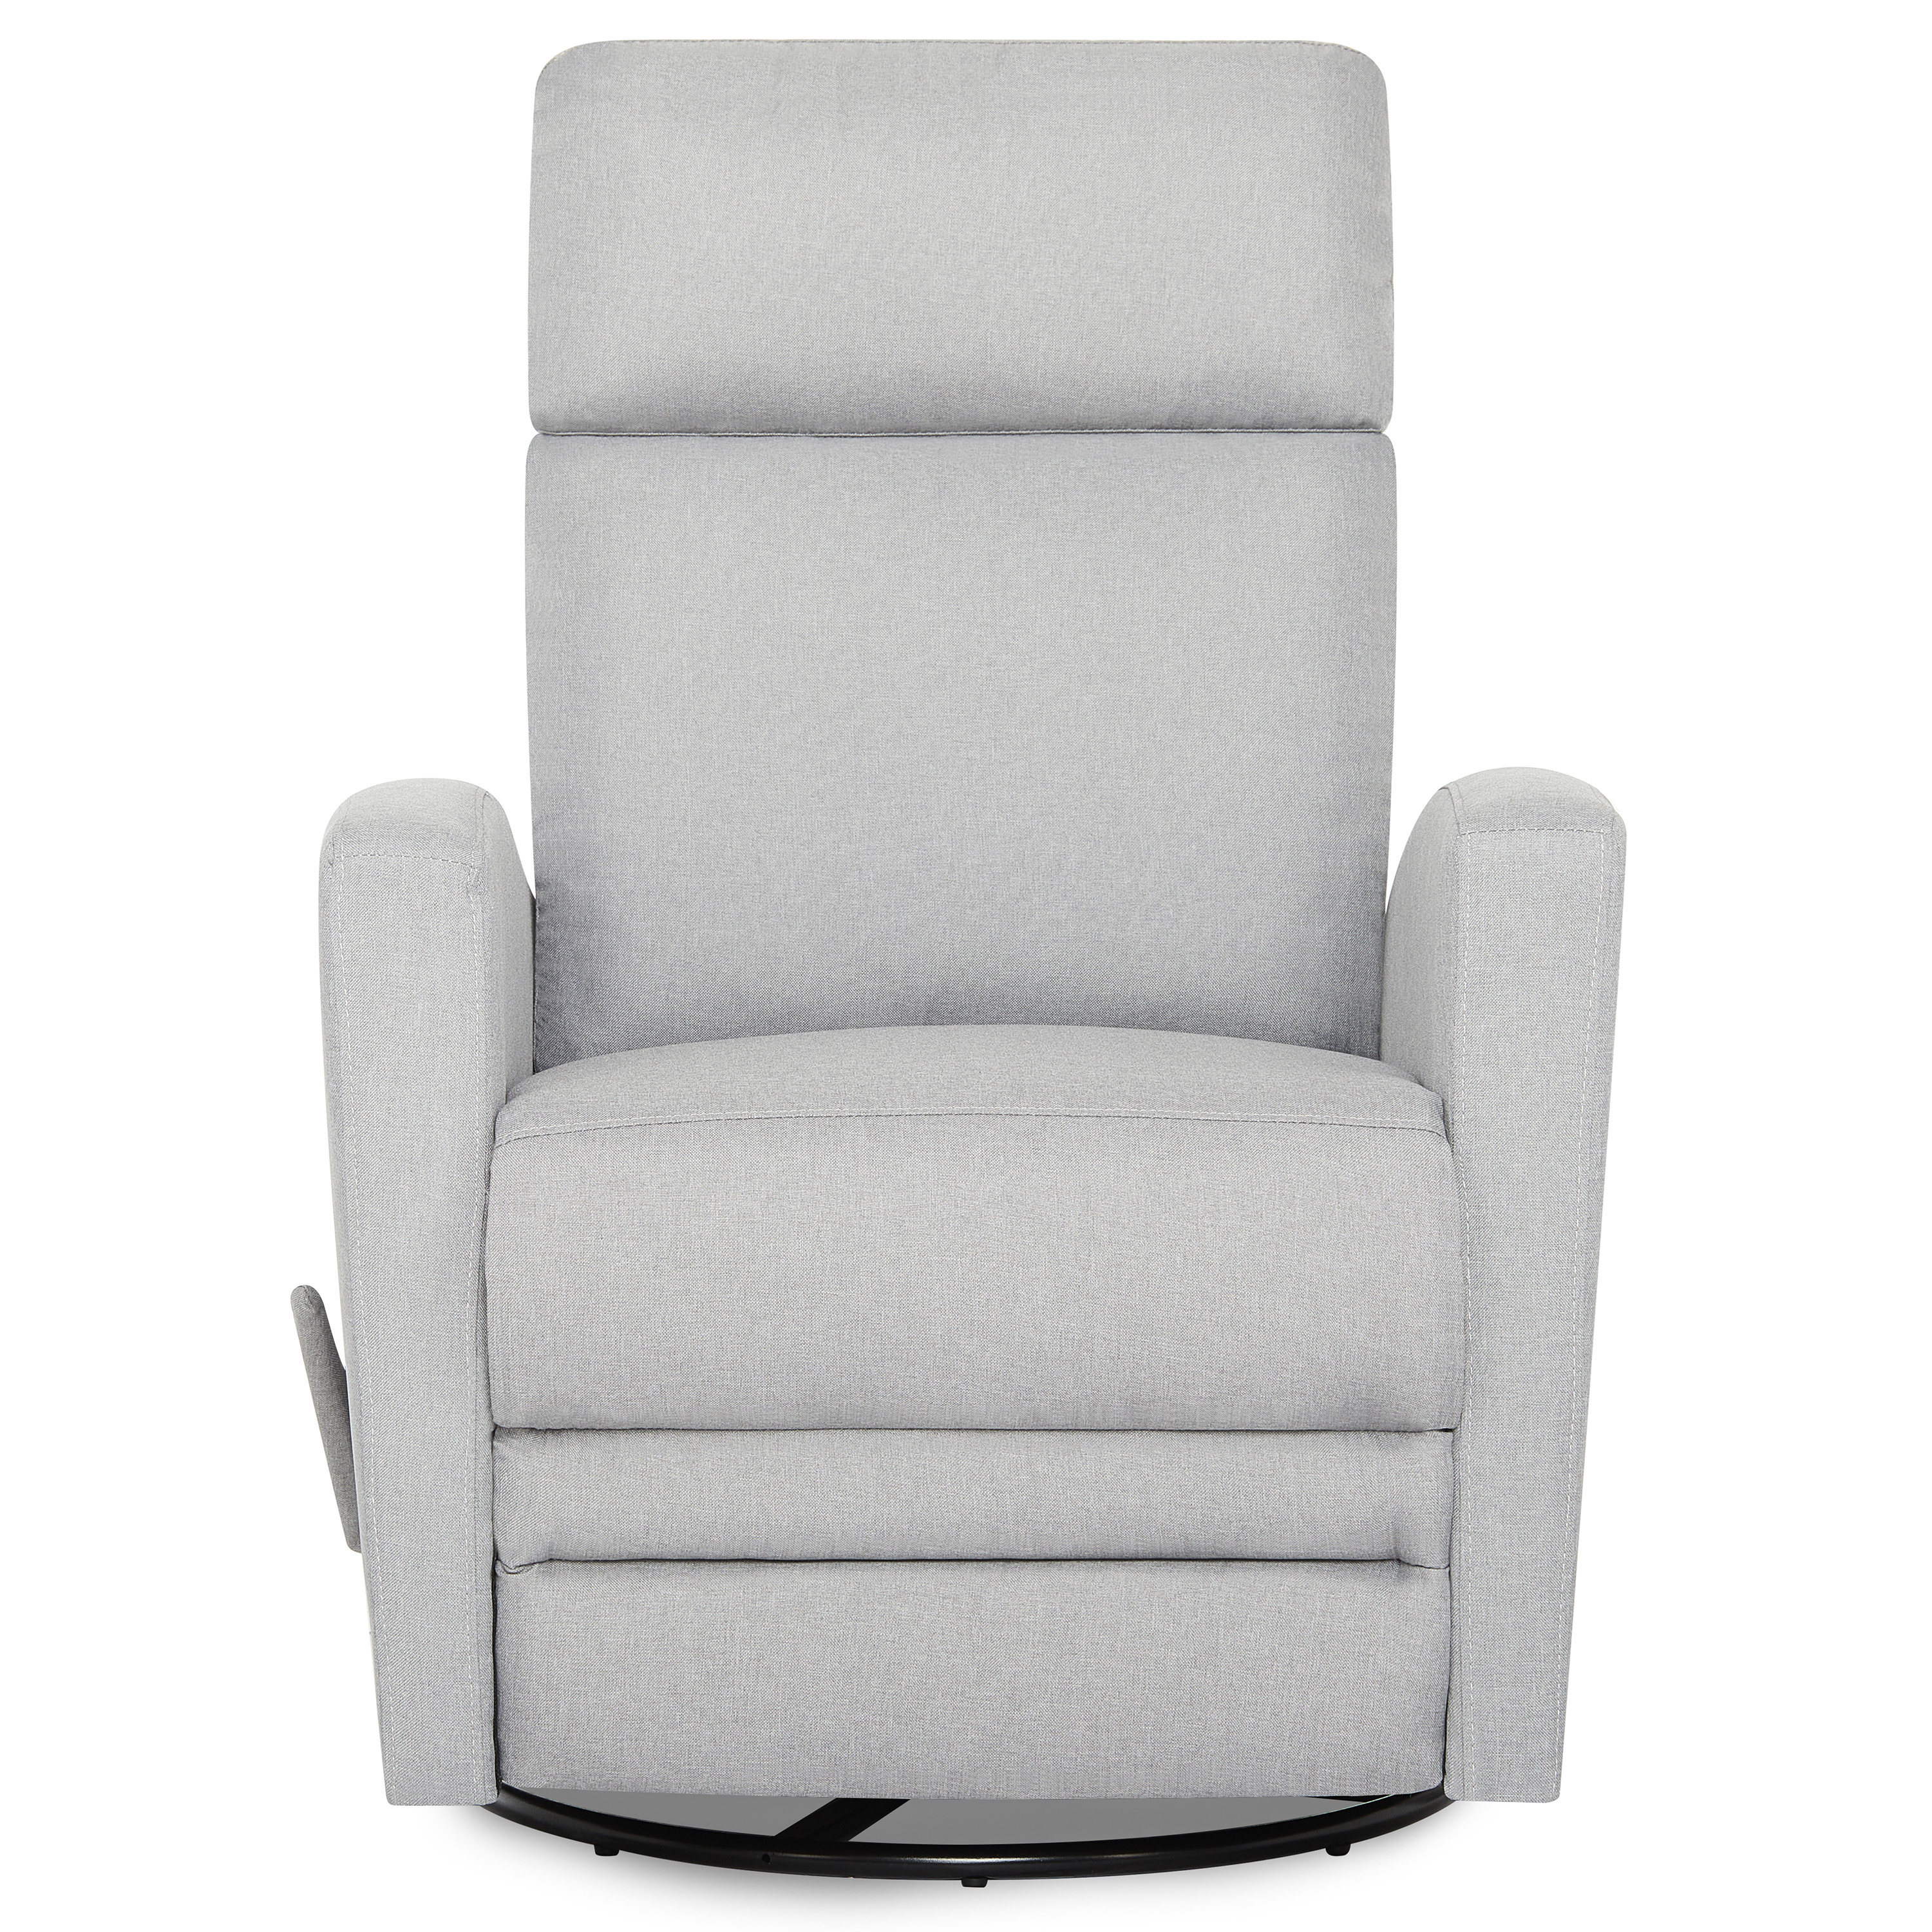 Dream On Me Chatham Swivel Gliding Recliner in Grey, FSC Certified, Durable Polyester Fabric - image 3 of 12